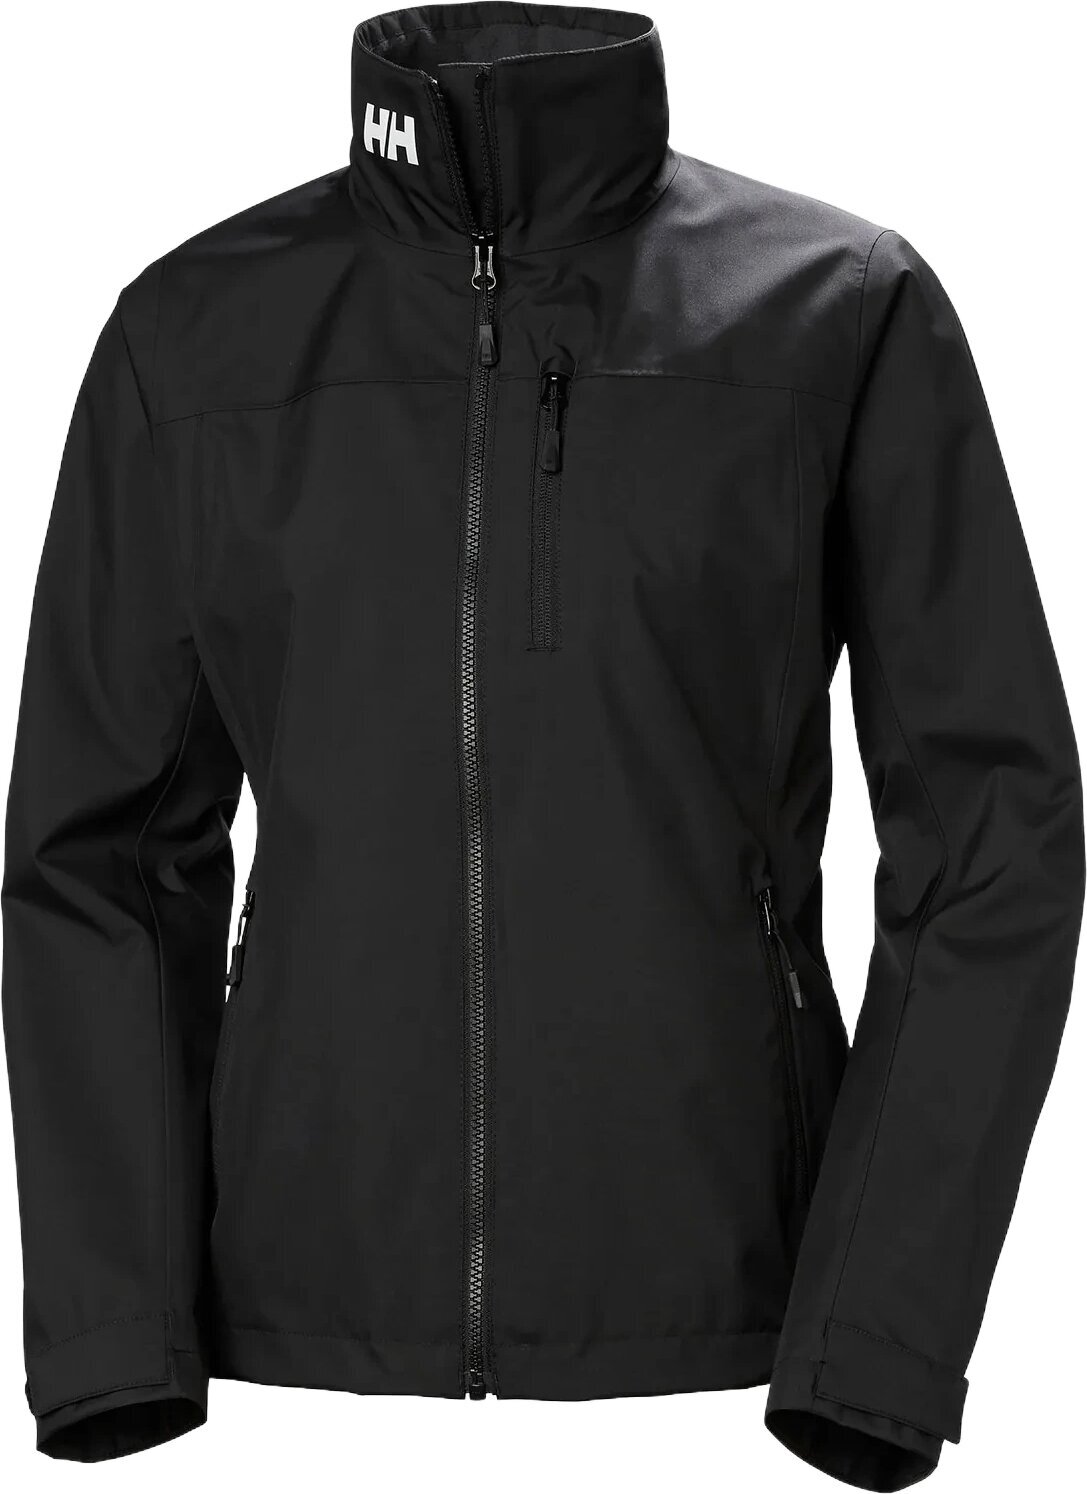 Giacca Helly Hansen Women's Crew Jacket 2.0 Giacca Black S